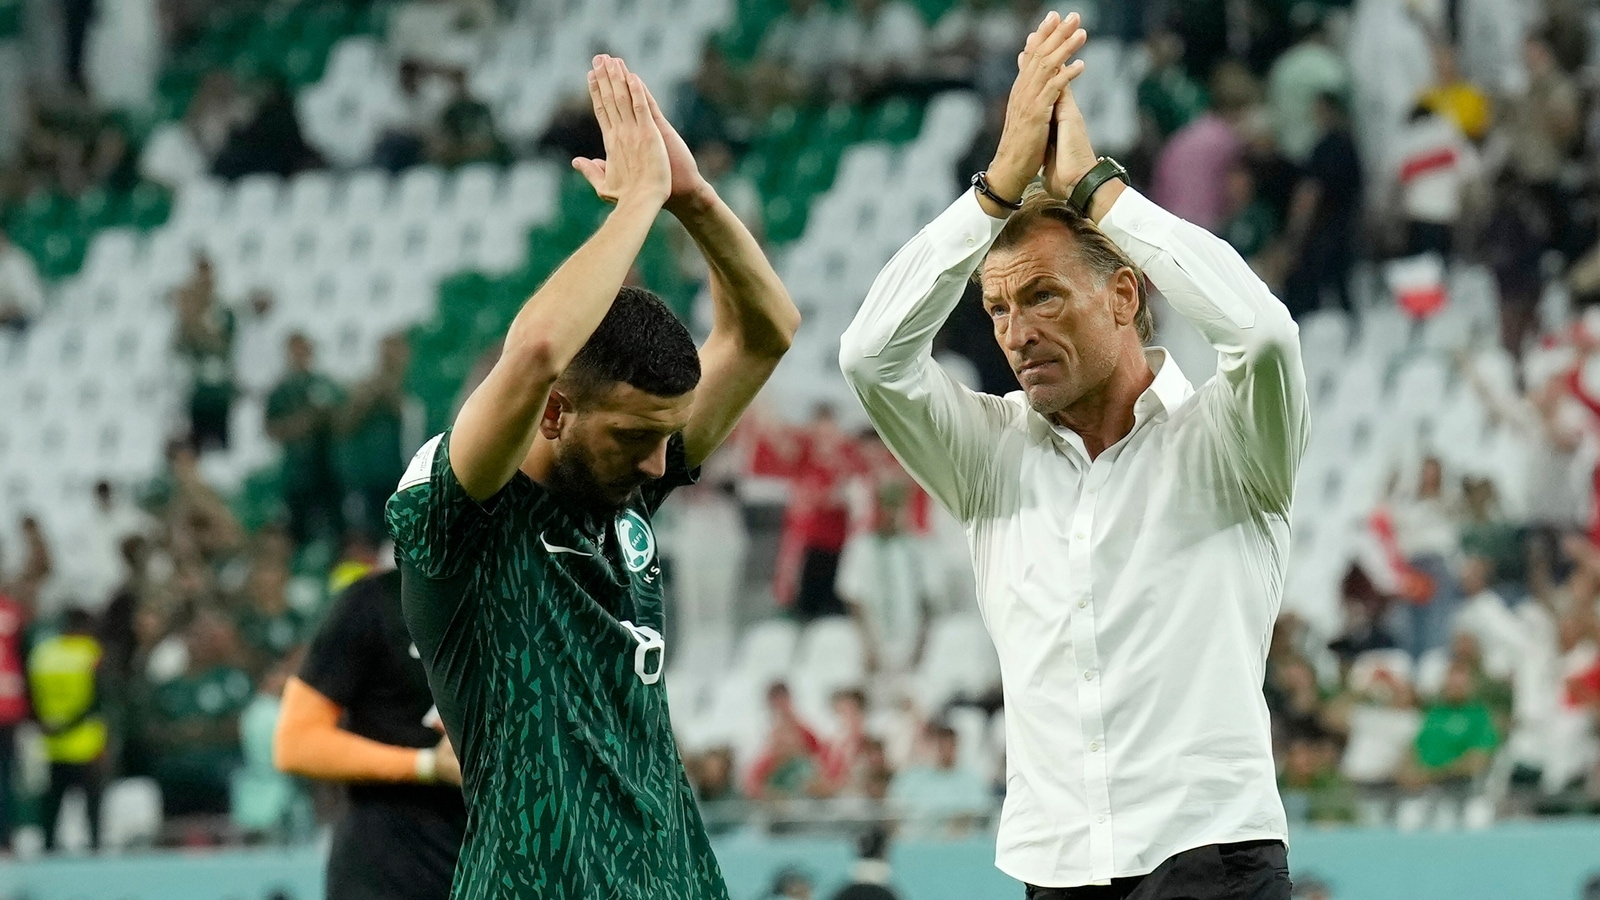 Saudi Arabia coach denies claims of players getting Rolls Royce after ARG win Football News